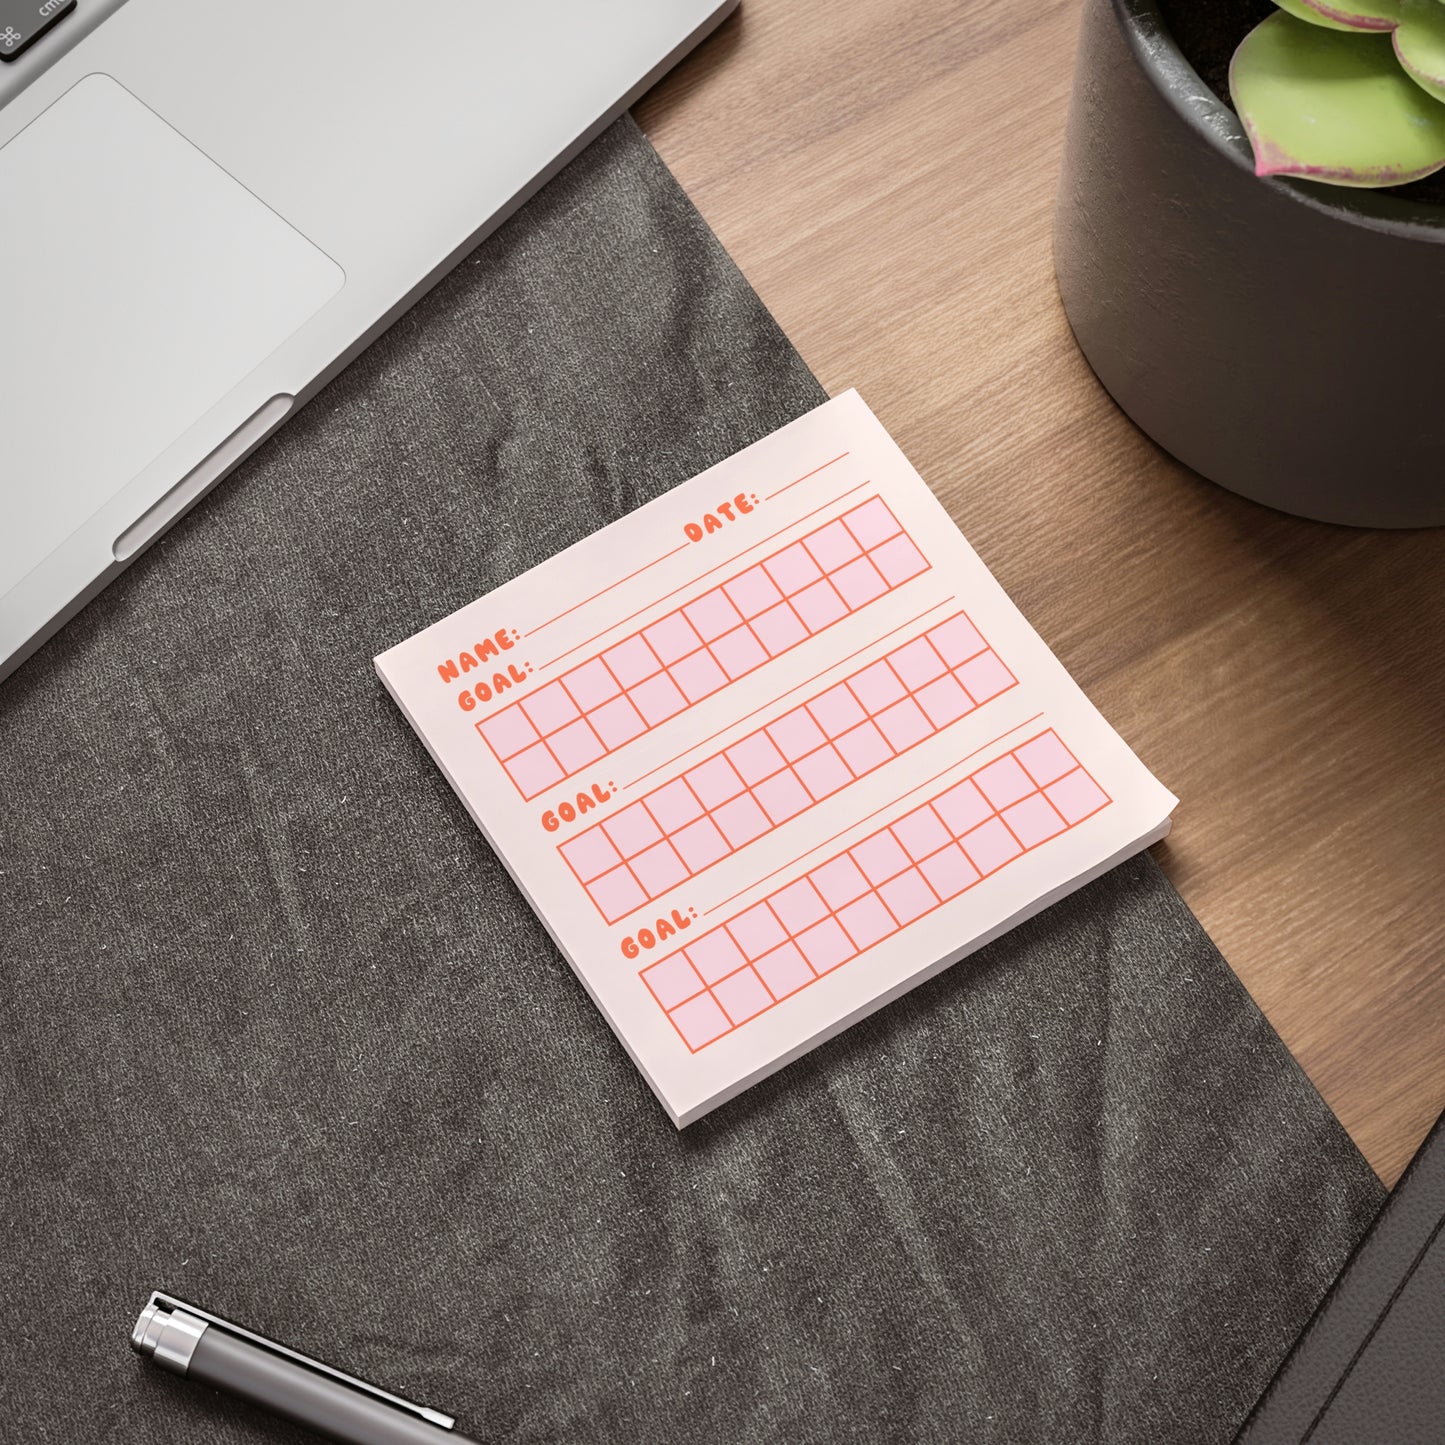 Multiple Goals Data Post-it® Note Pads